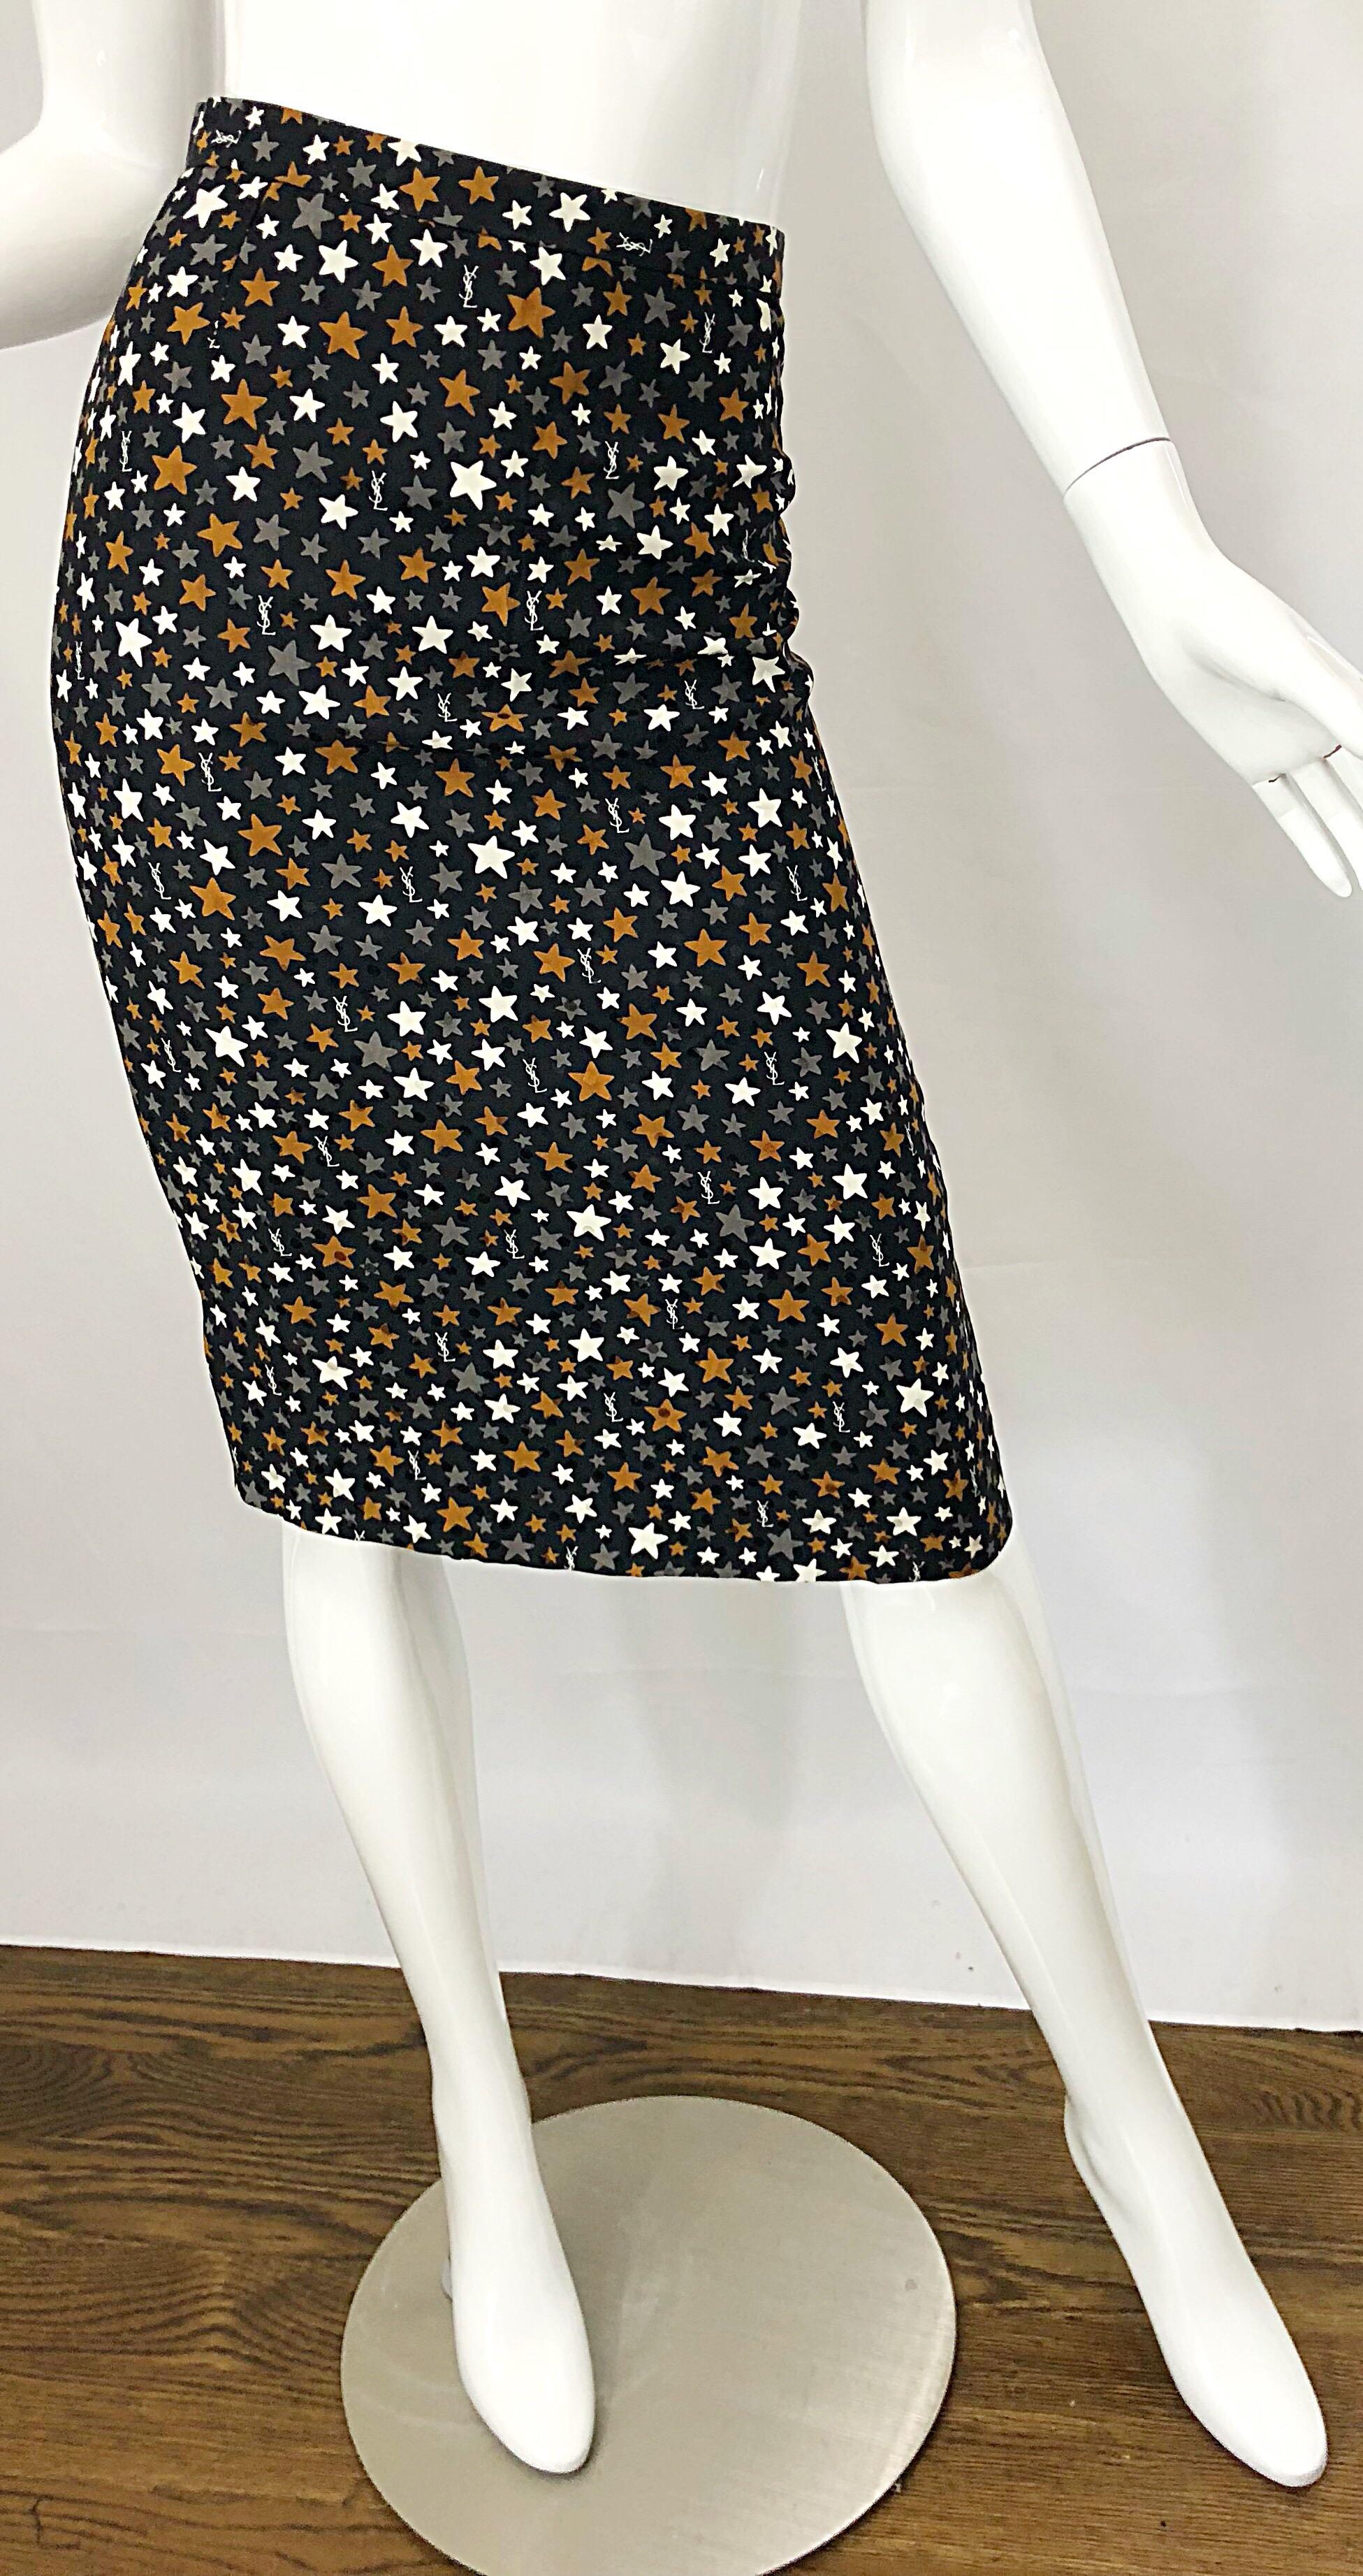 1990s YVES SAINT LAURENT ' logo and stars' high waisted silk pencil skit! Features a black silk background, with brown, gray and white YSL logo and stars printed throughout. Fantastic flattering fit with an exciting stylish print. Hidden zipper up